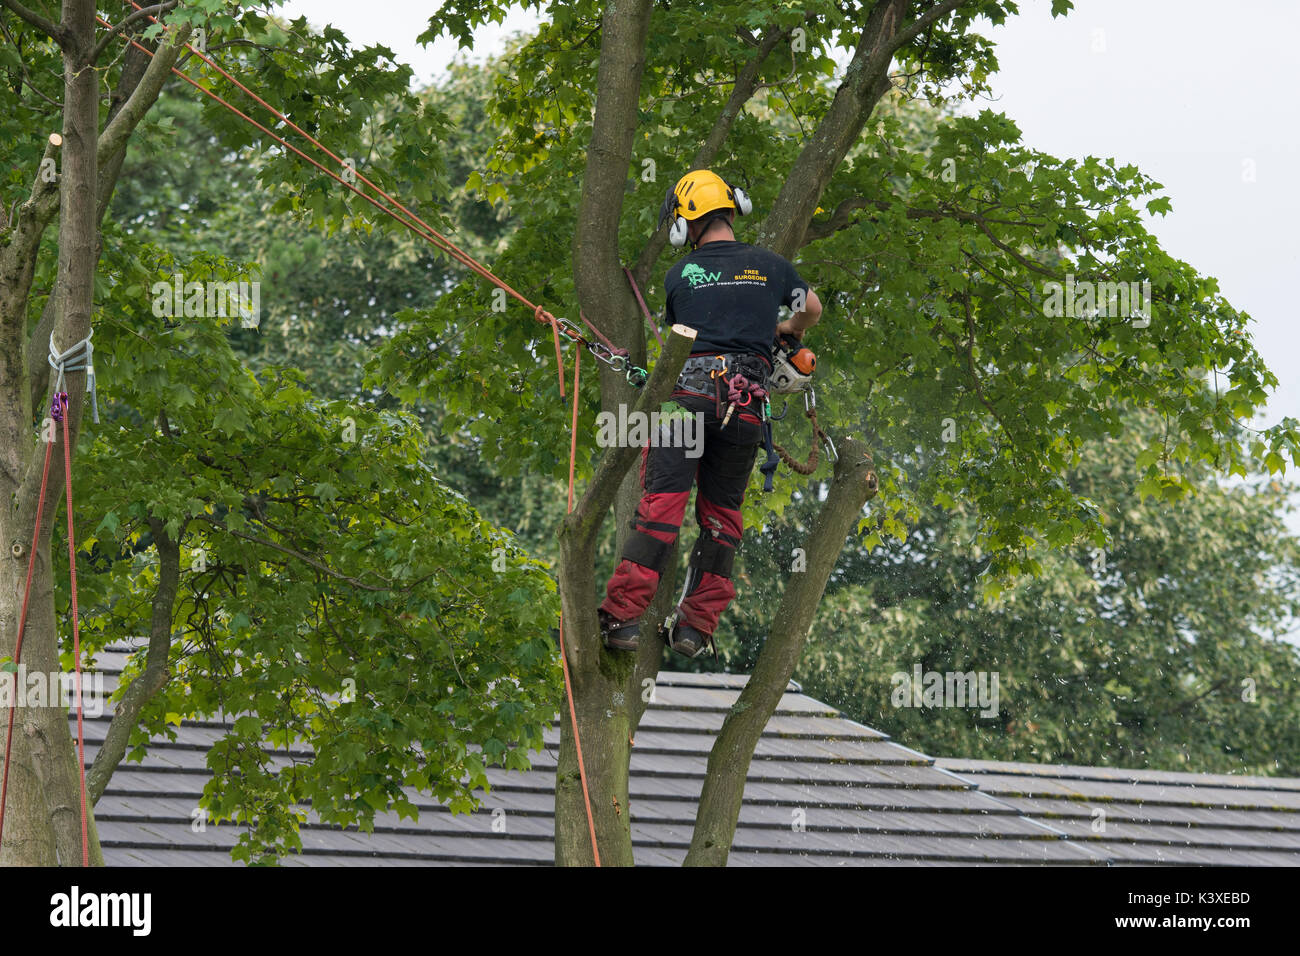 Tree surgeon working in protective gear, using climbing ropes for safety & holding chainsaw, high in branches of garden tree - Yorkshire, England, UK. Stock Photo